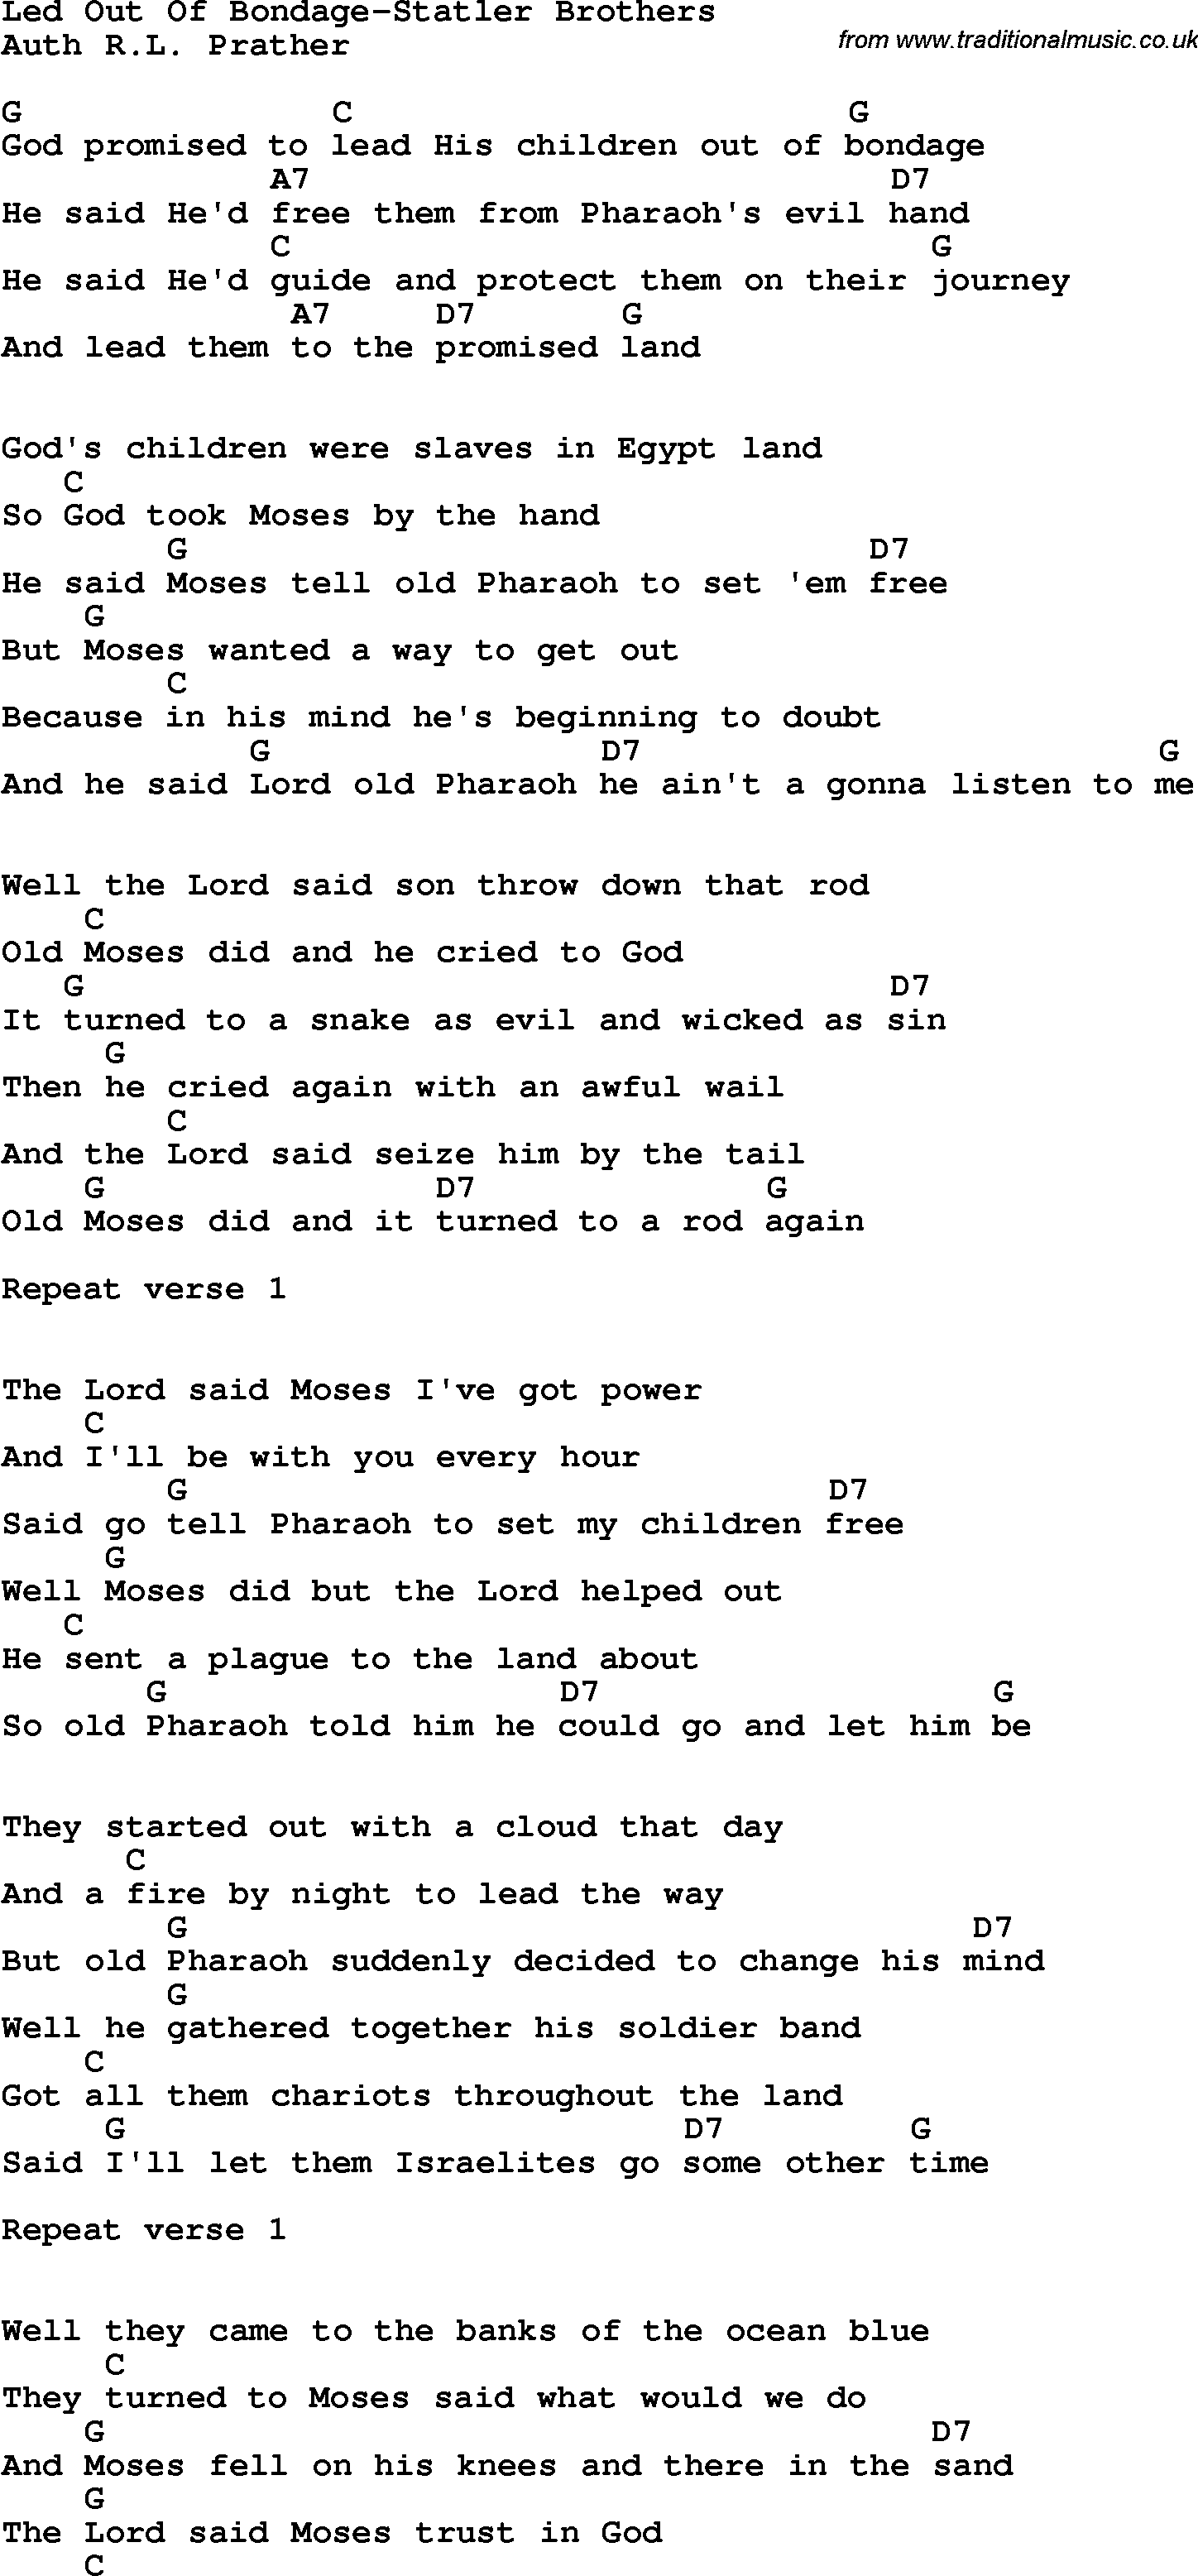 Country, Southern and Bluegrass Gospel Song Led Out Of Bondage-Statler Brothers lyrics and chords